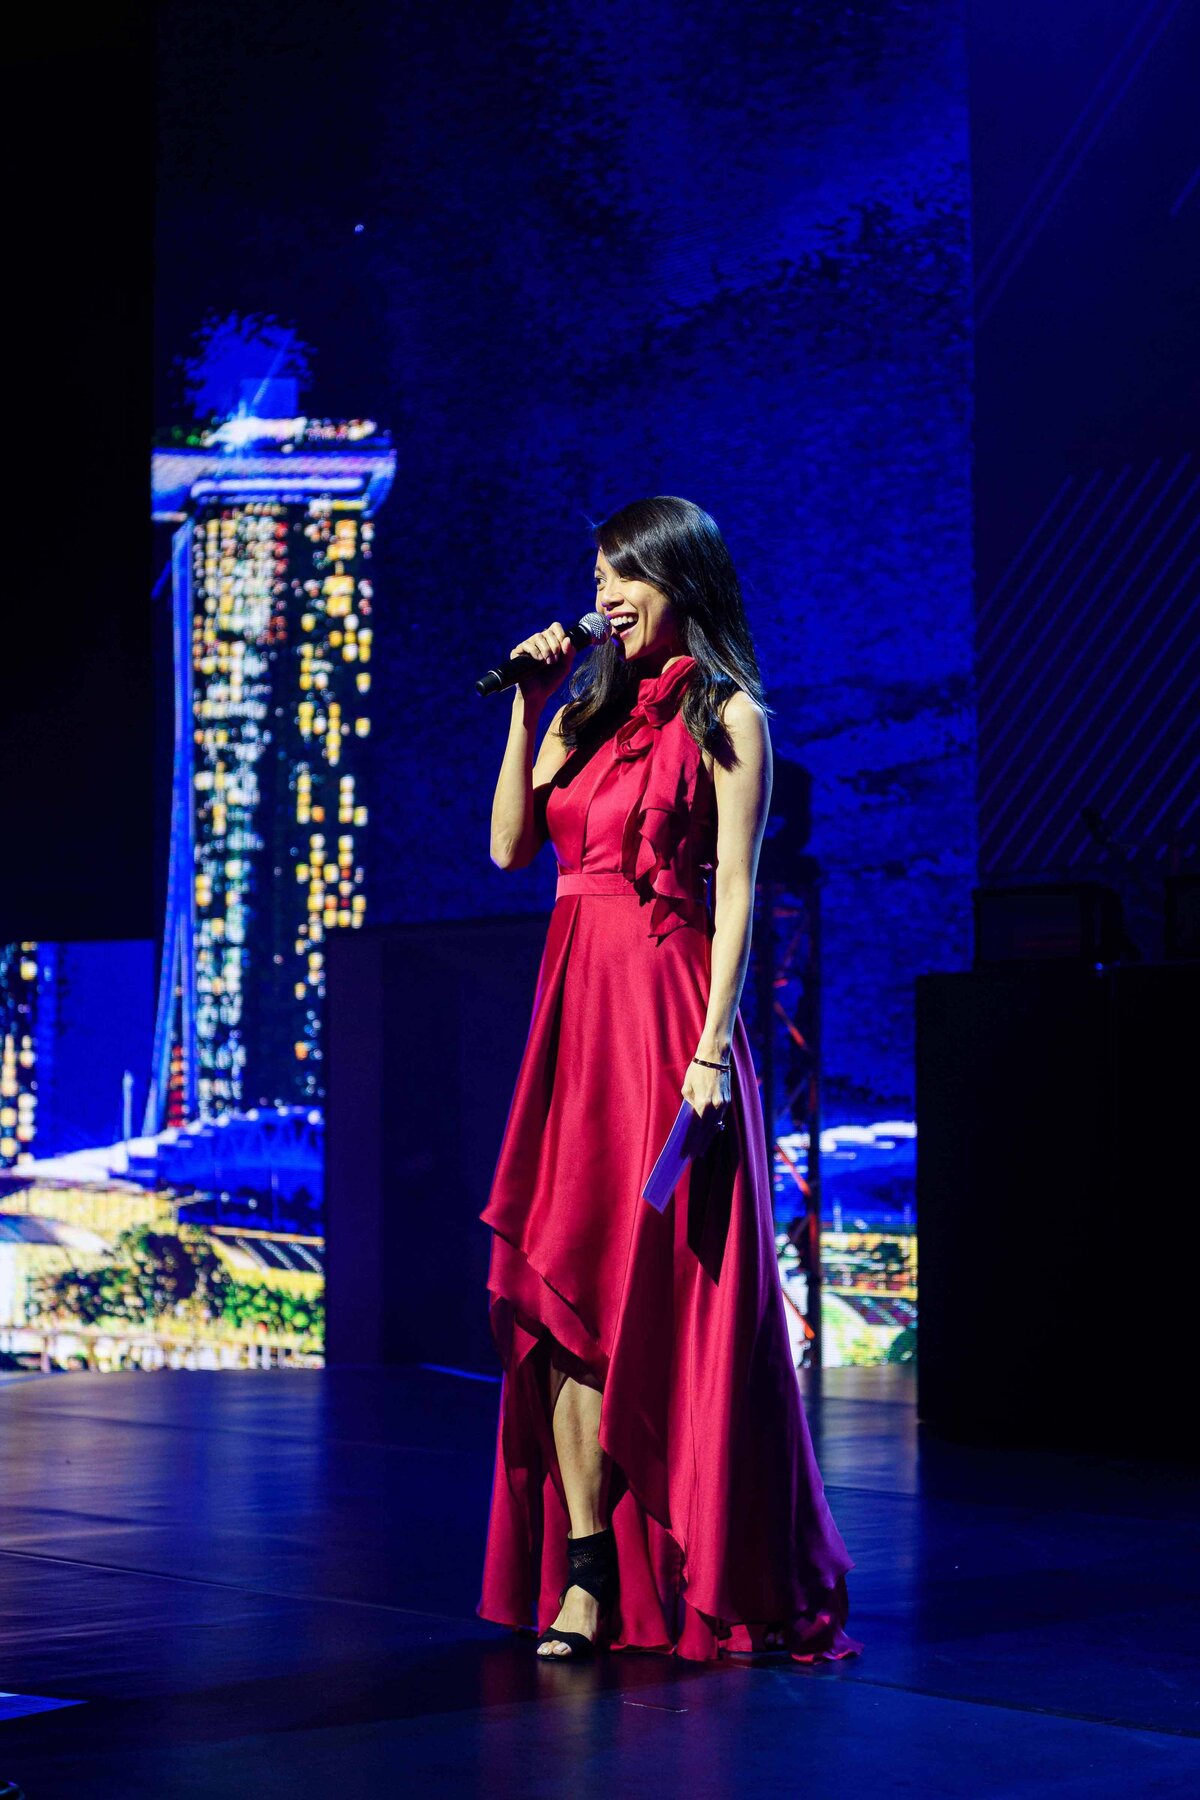 Women performs in formal red dress in Signapore for teradata conference